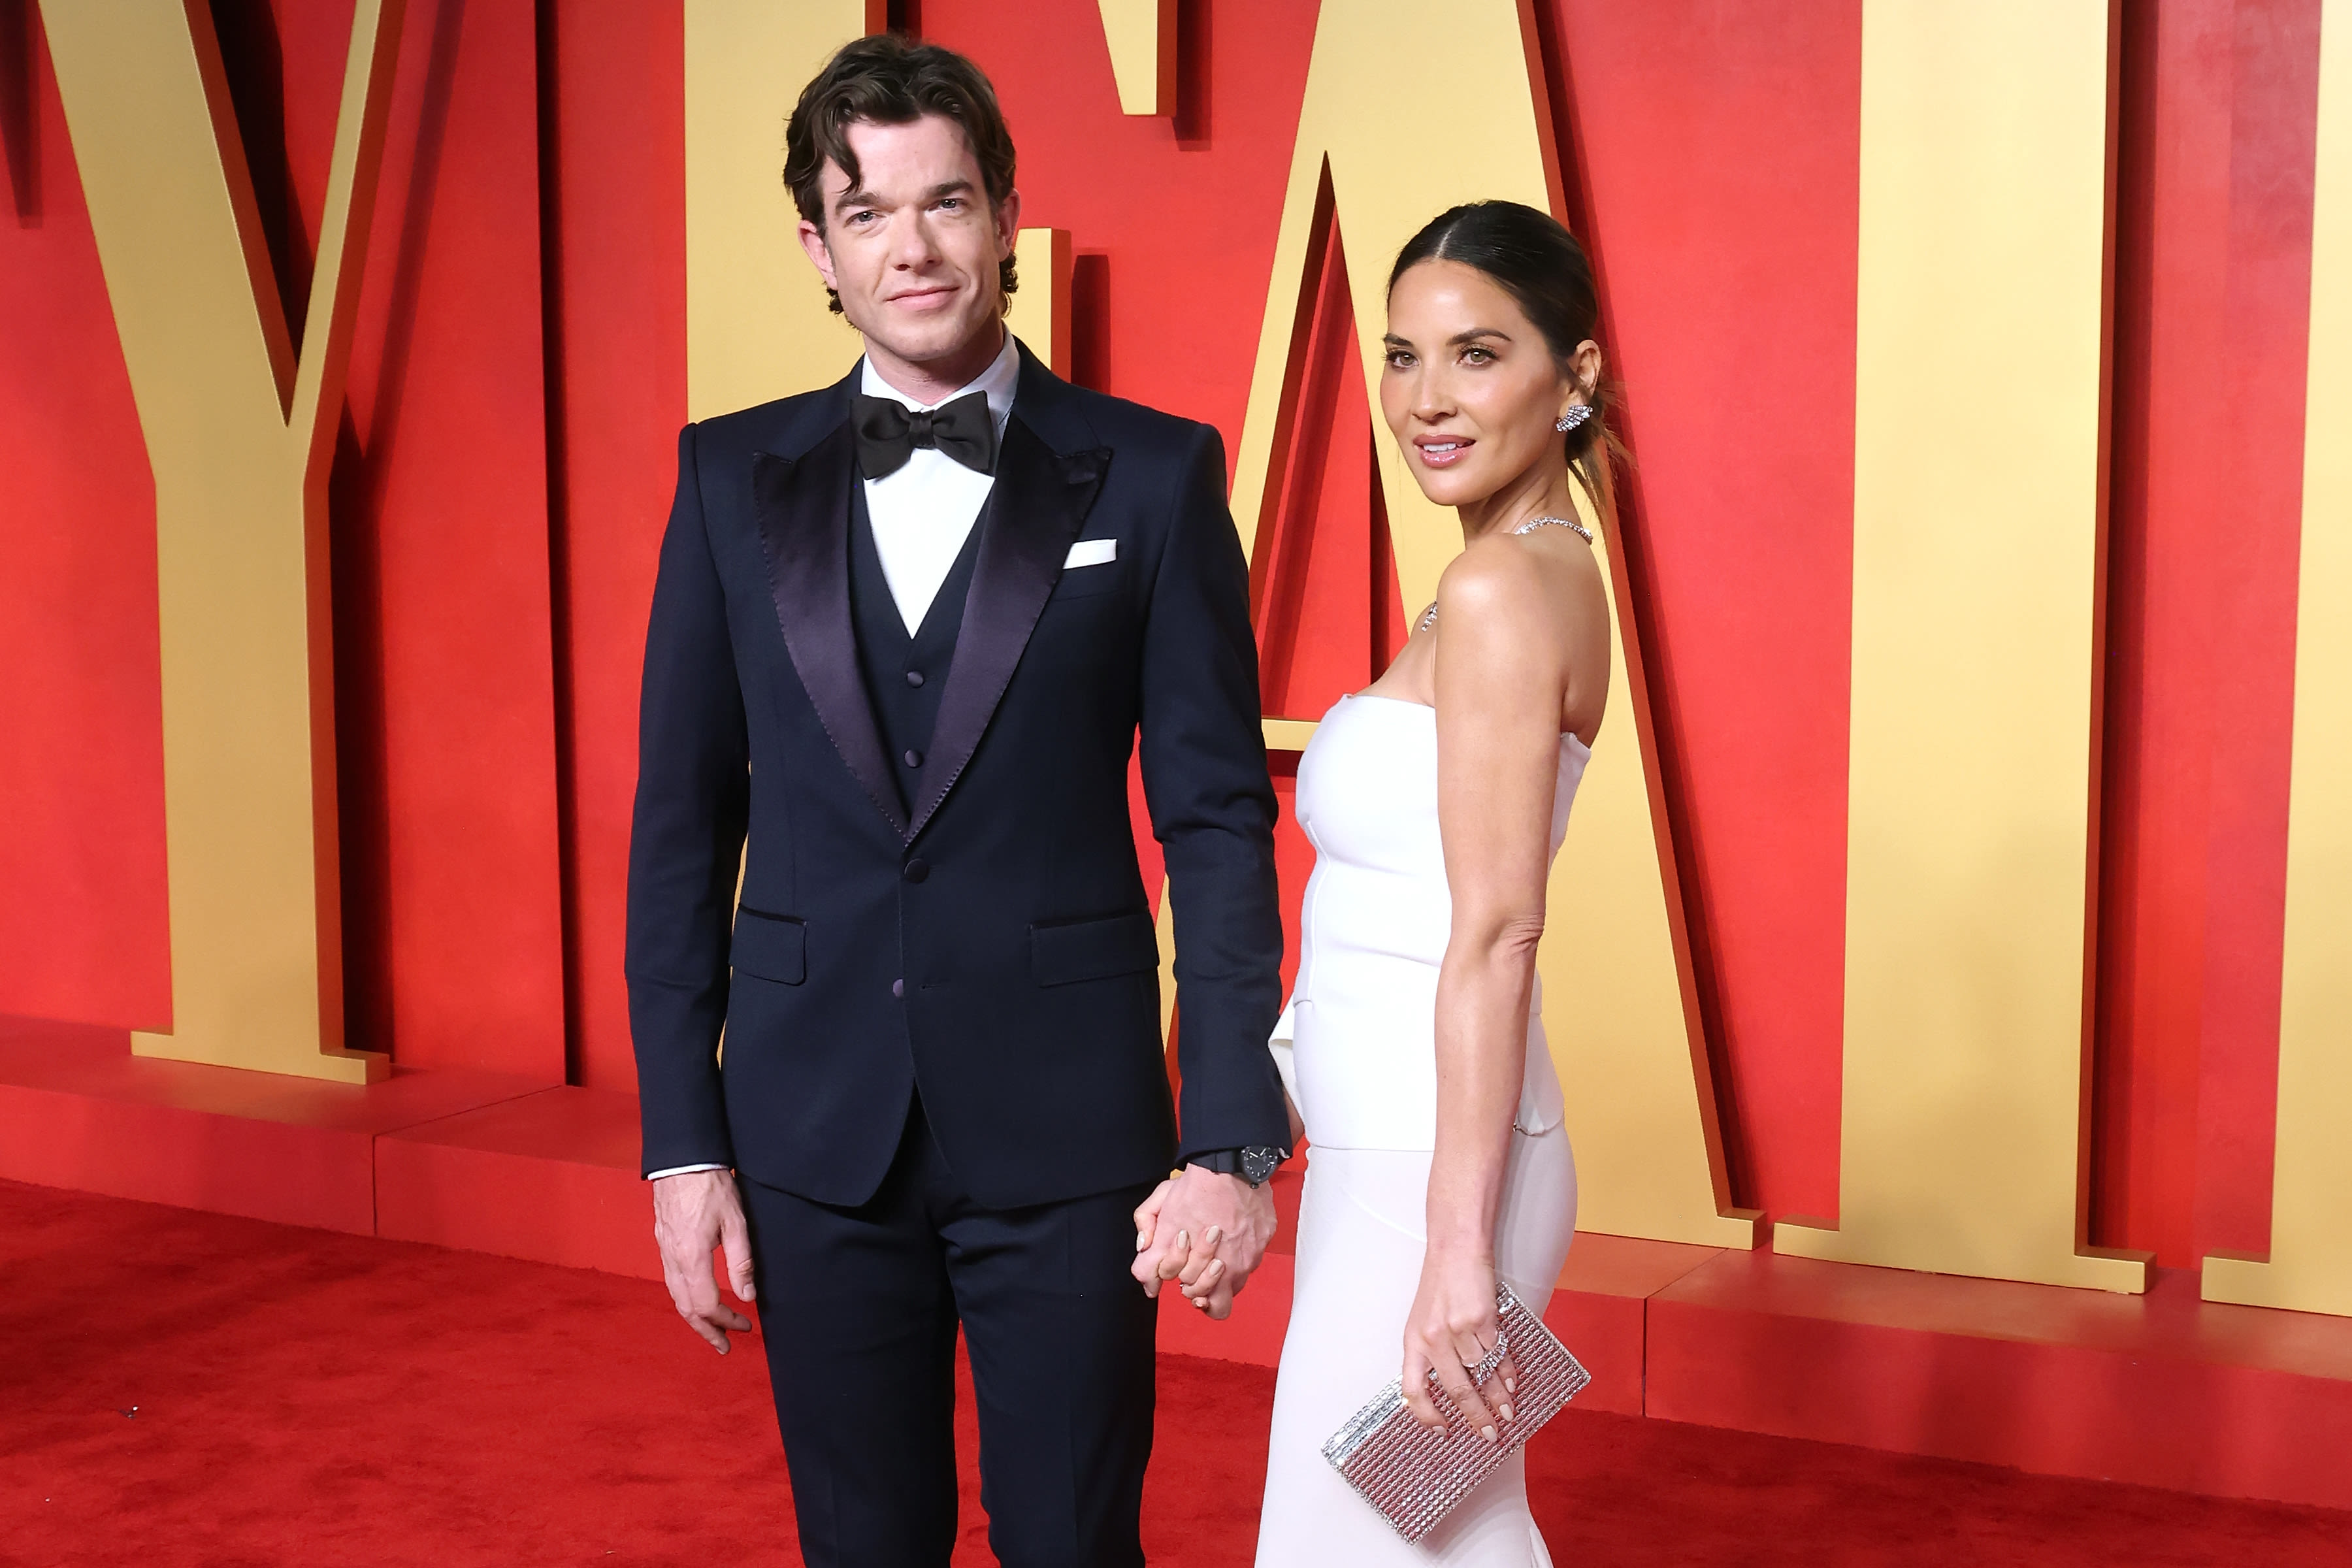 Olivia Munn and John Mulaney weren't 'done growing' their family when she was diagnosed with cancer — so they froze embryos. Here's how the process works amid treatment.